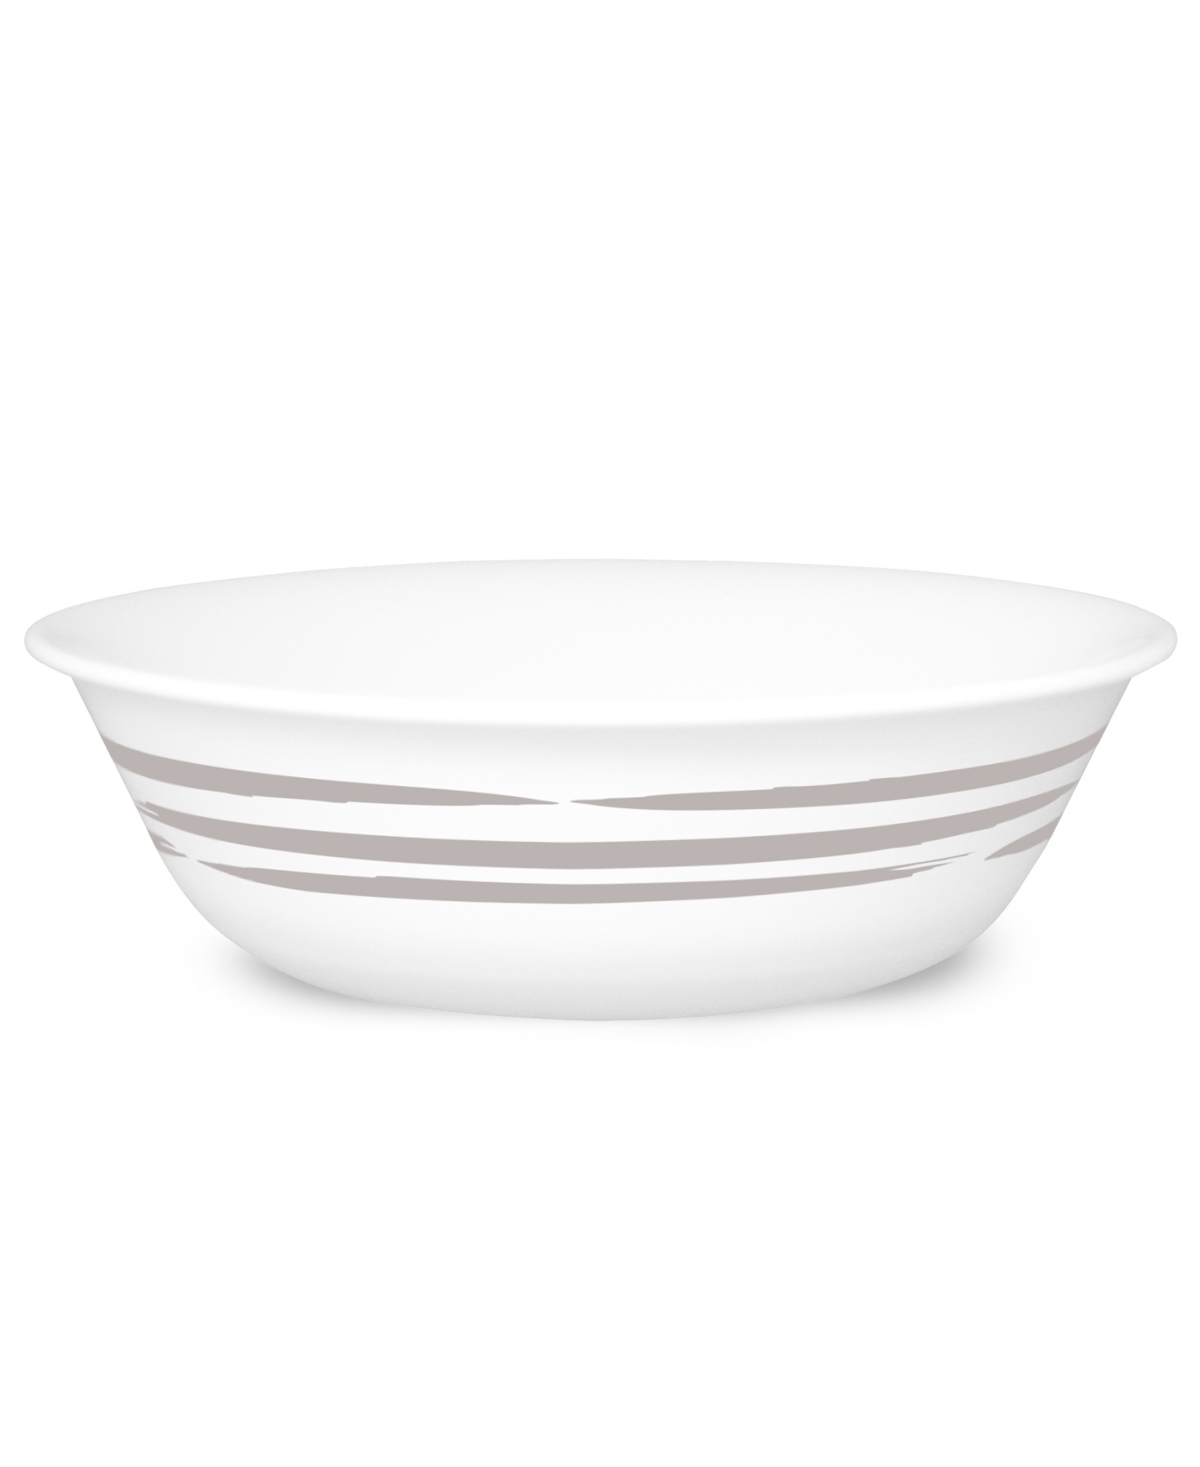 Brushed Silver-Tone Soup or Cereal Bowl - White, Silvery-Gray